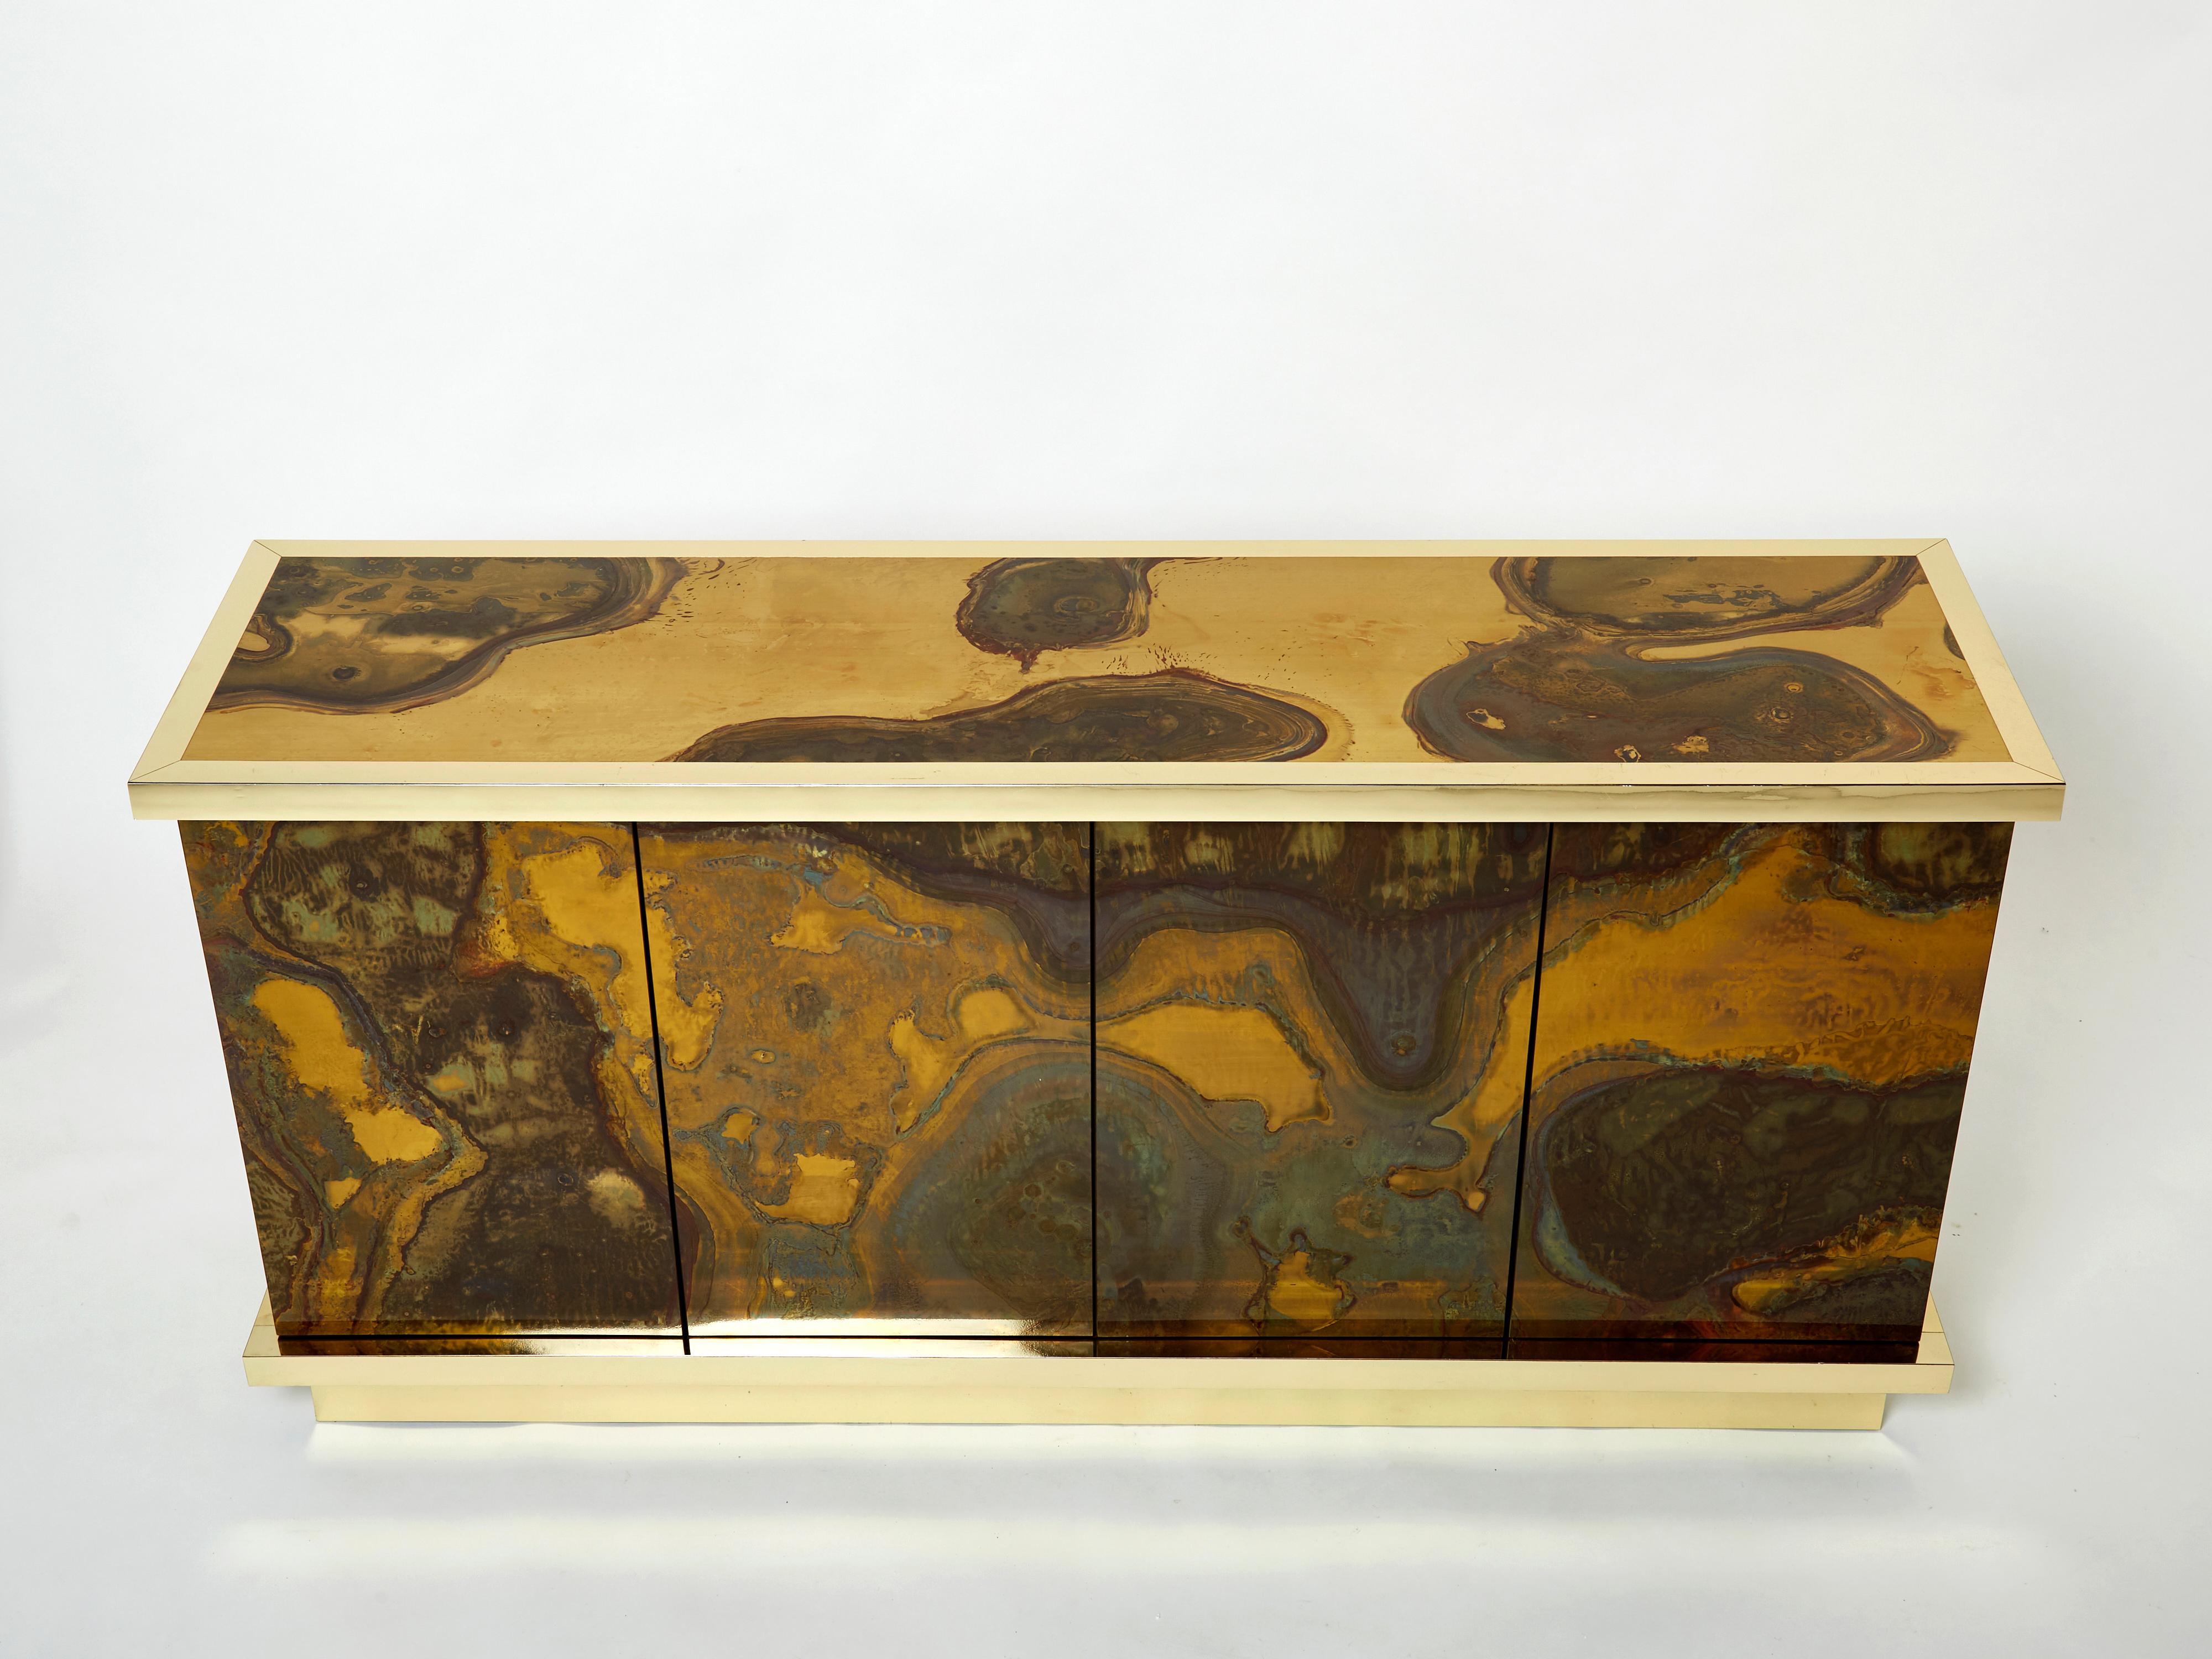 This unique sideboard was created by Isabelle and Richard Faure for Parisian design firm Maison Honore in the late 1970s. Entirely covered by decorated oxidized and patinated brass all over, that was then fixed and varnished. The base and frames are